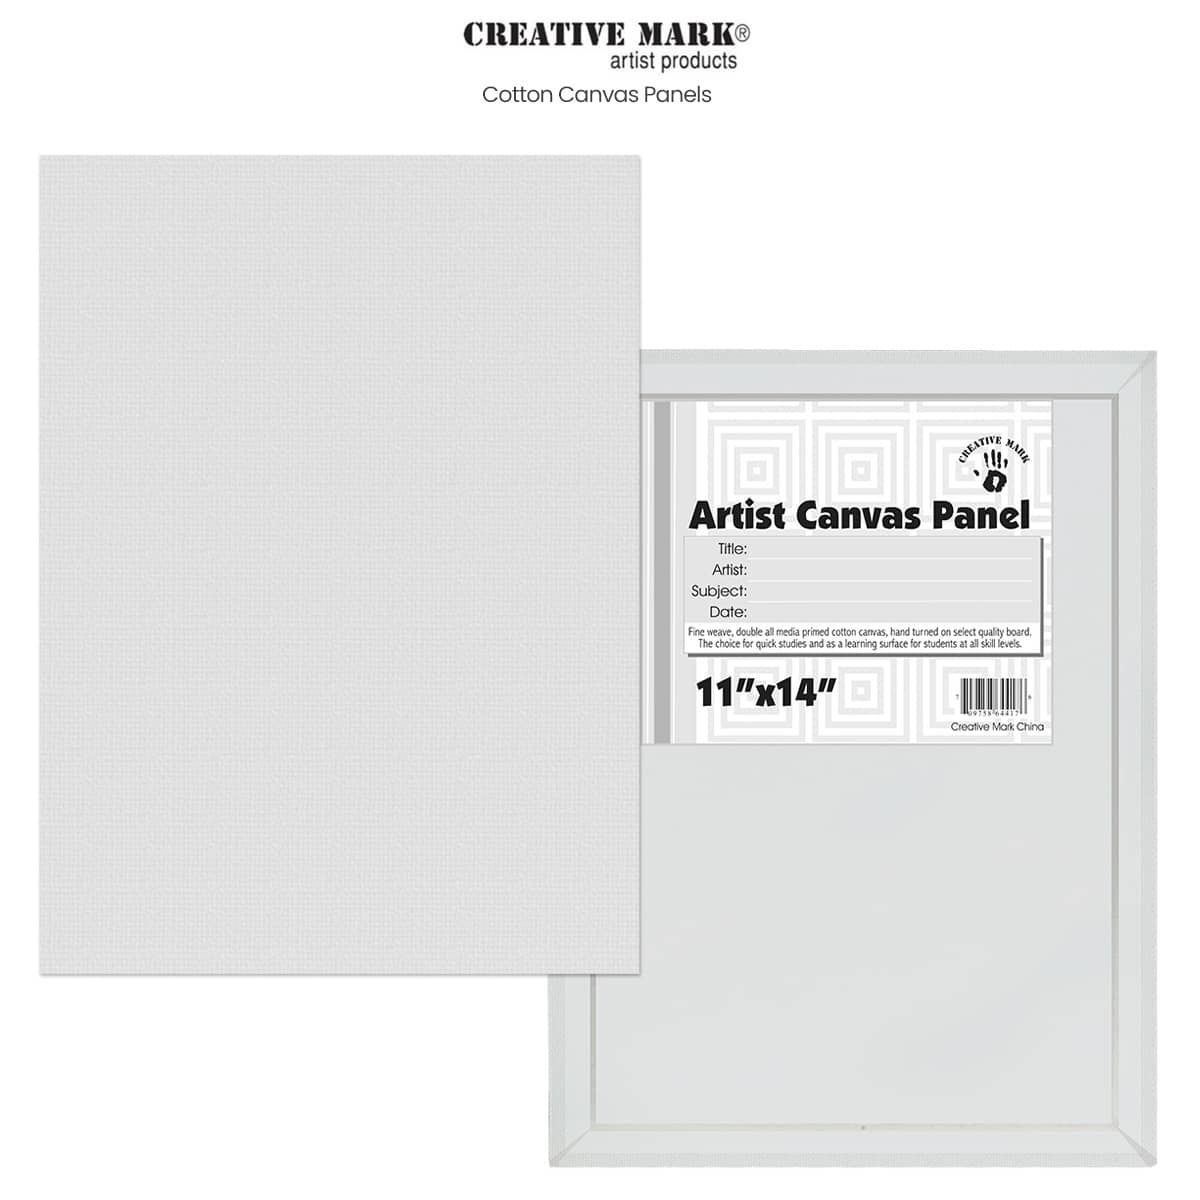 Pouring & Oil Painting Artist Quality Acid Free Canvas Board for Acrylic 100% Cotton,Canvas Panels 24 Pack CONDA Canvases for Painting 11 x 14 inch Primed 